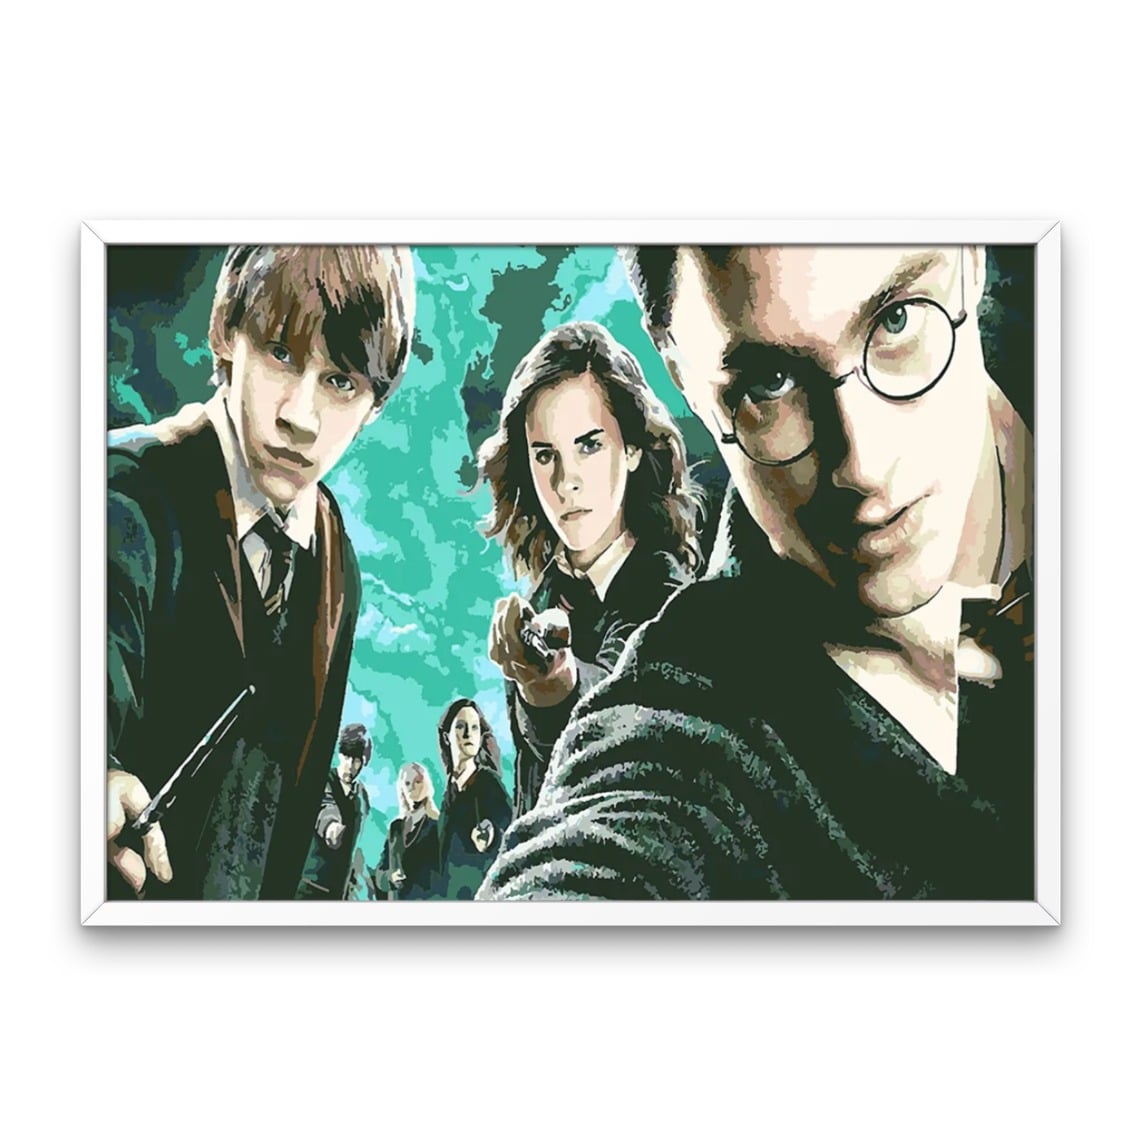 A diamond painting of Harry potter first years. I loved completing